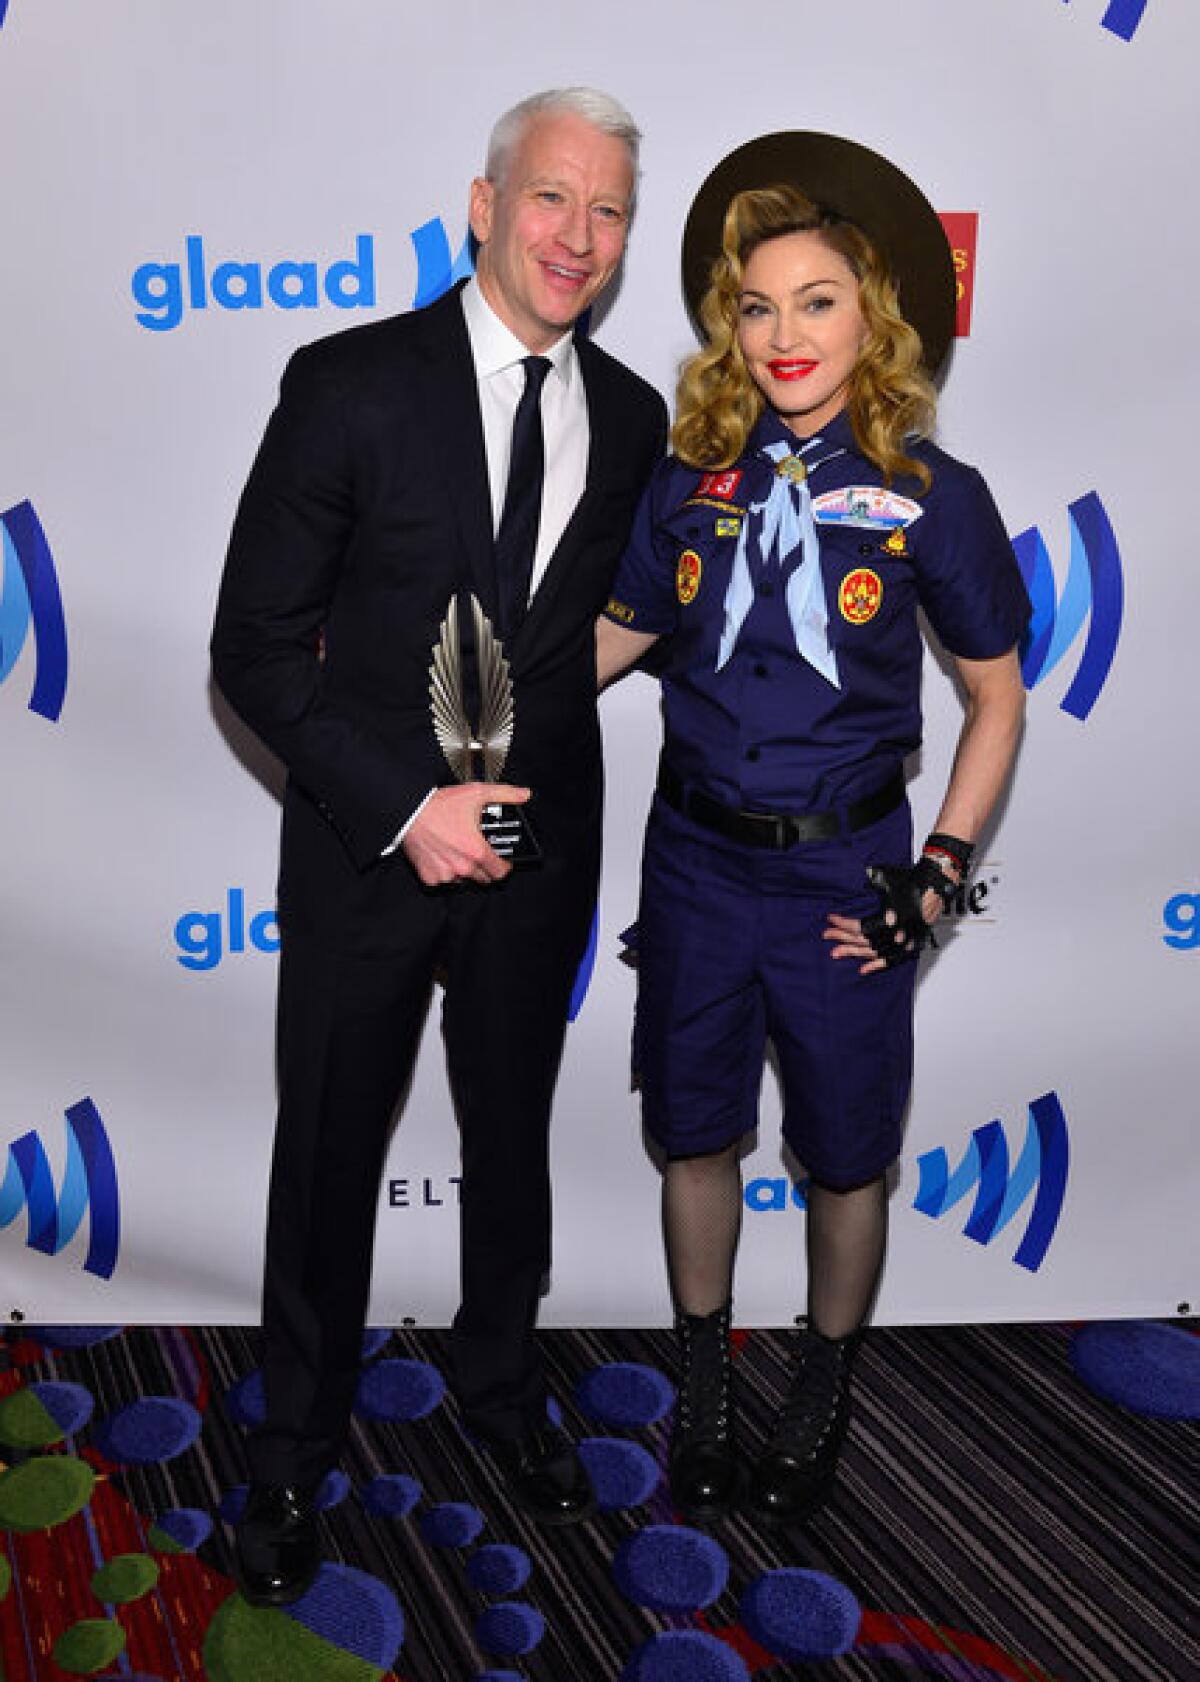 Anderson Cooper and Madonna at the GLAAD Media Awards on Saturday in New York.